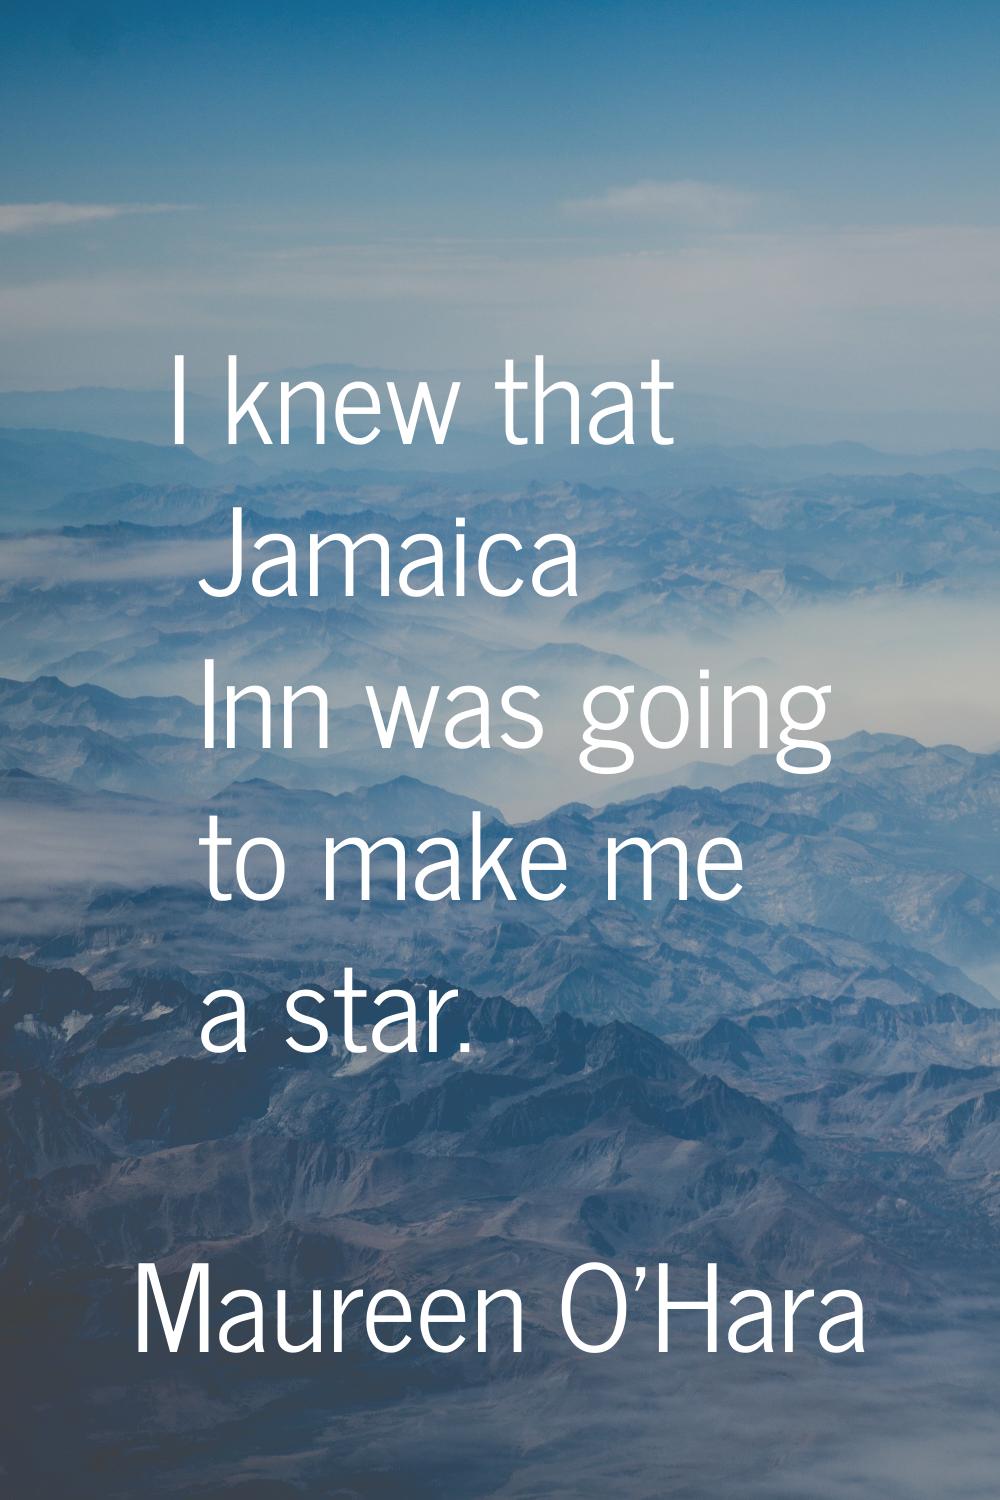 I knew that Jamaica Inn was going to make me a star.